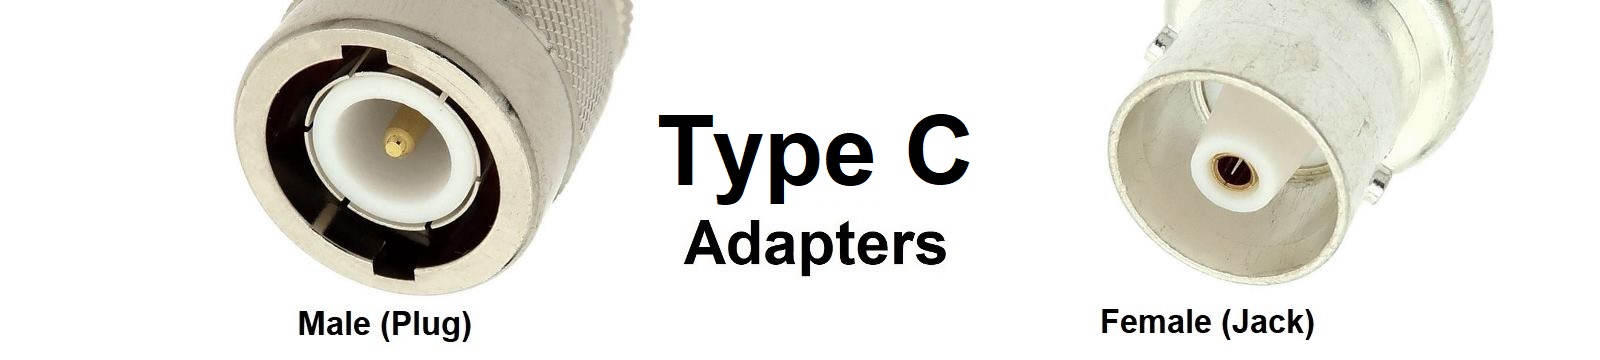 Type C Adapters Category Banner - Max-Gain Systems, Inc.